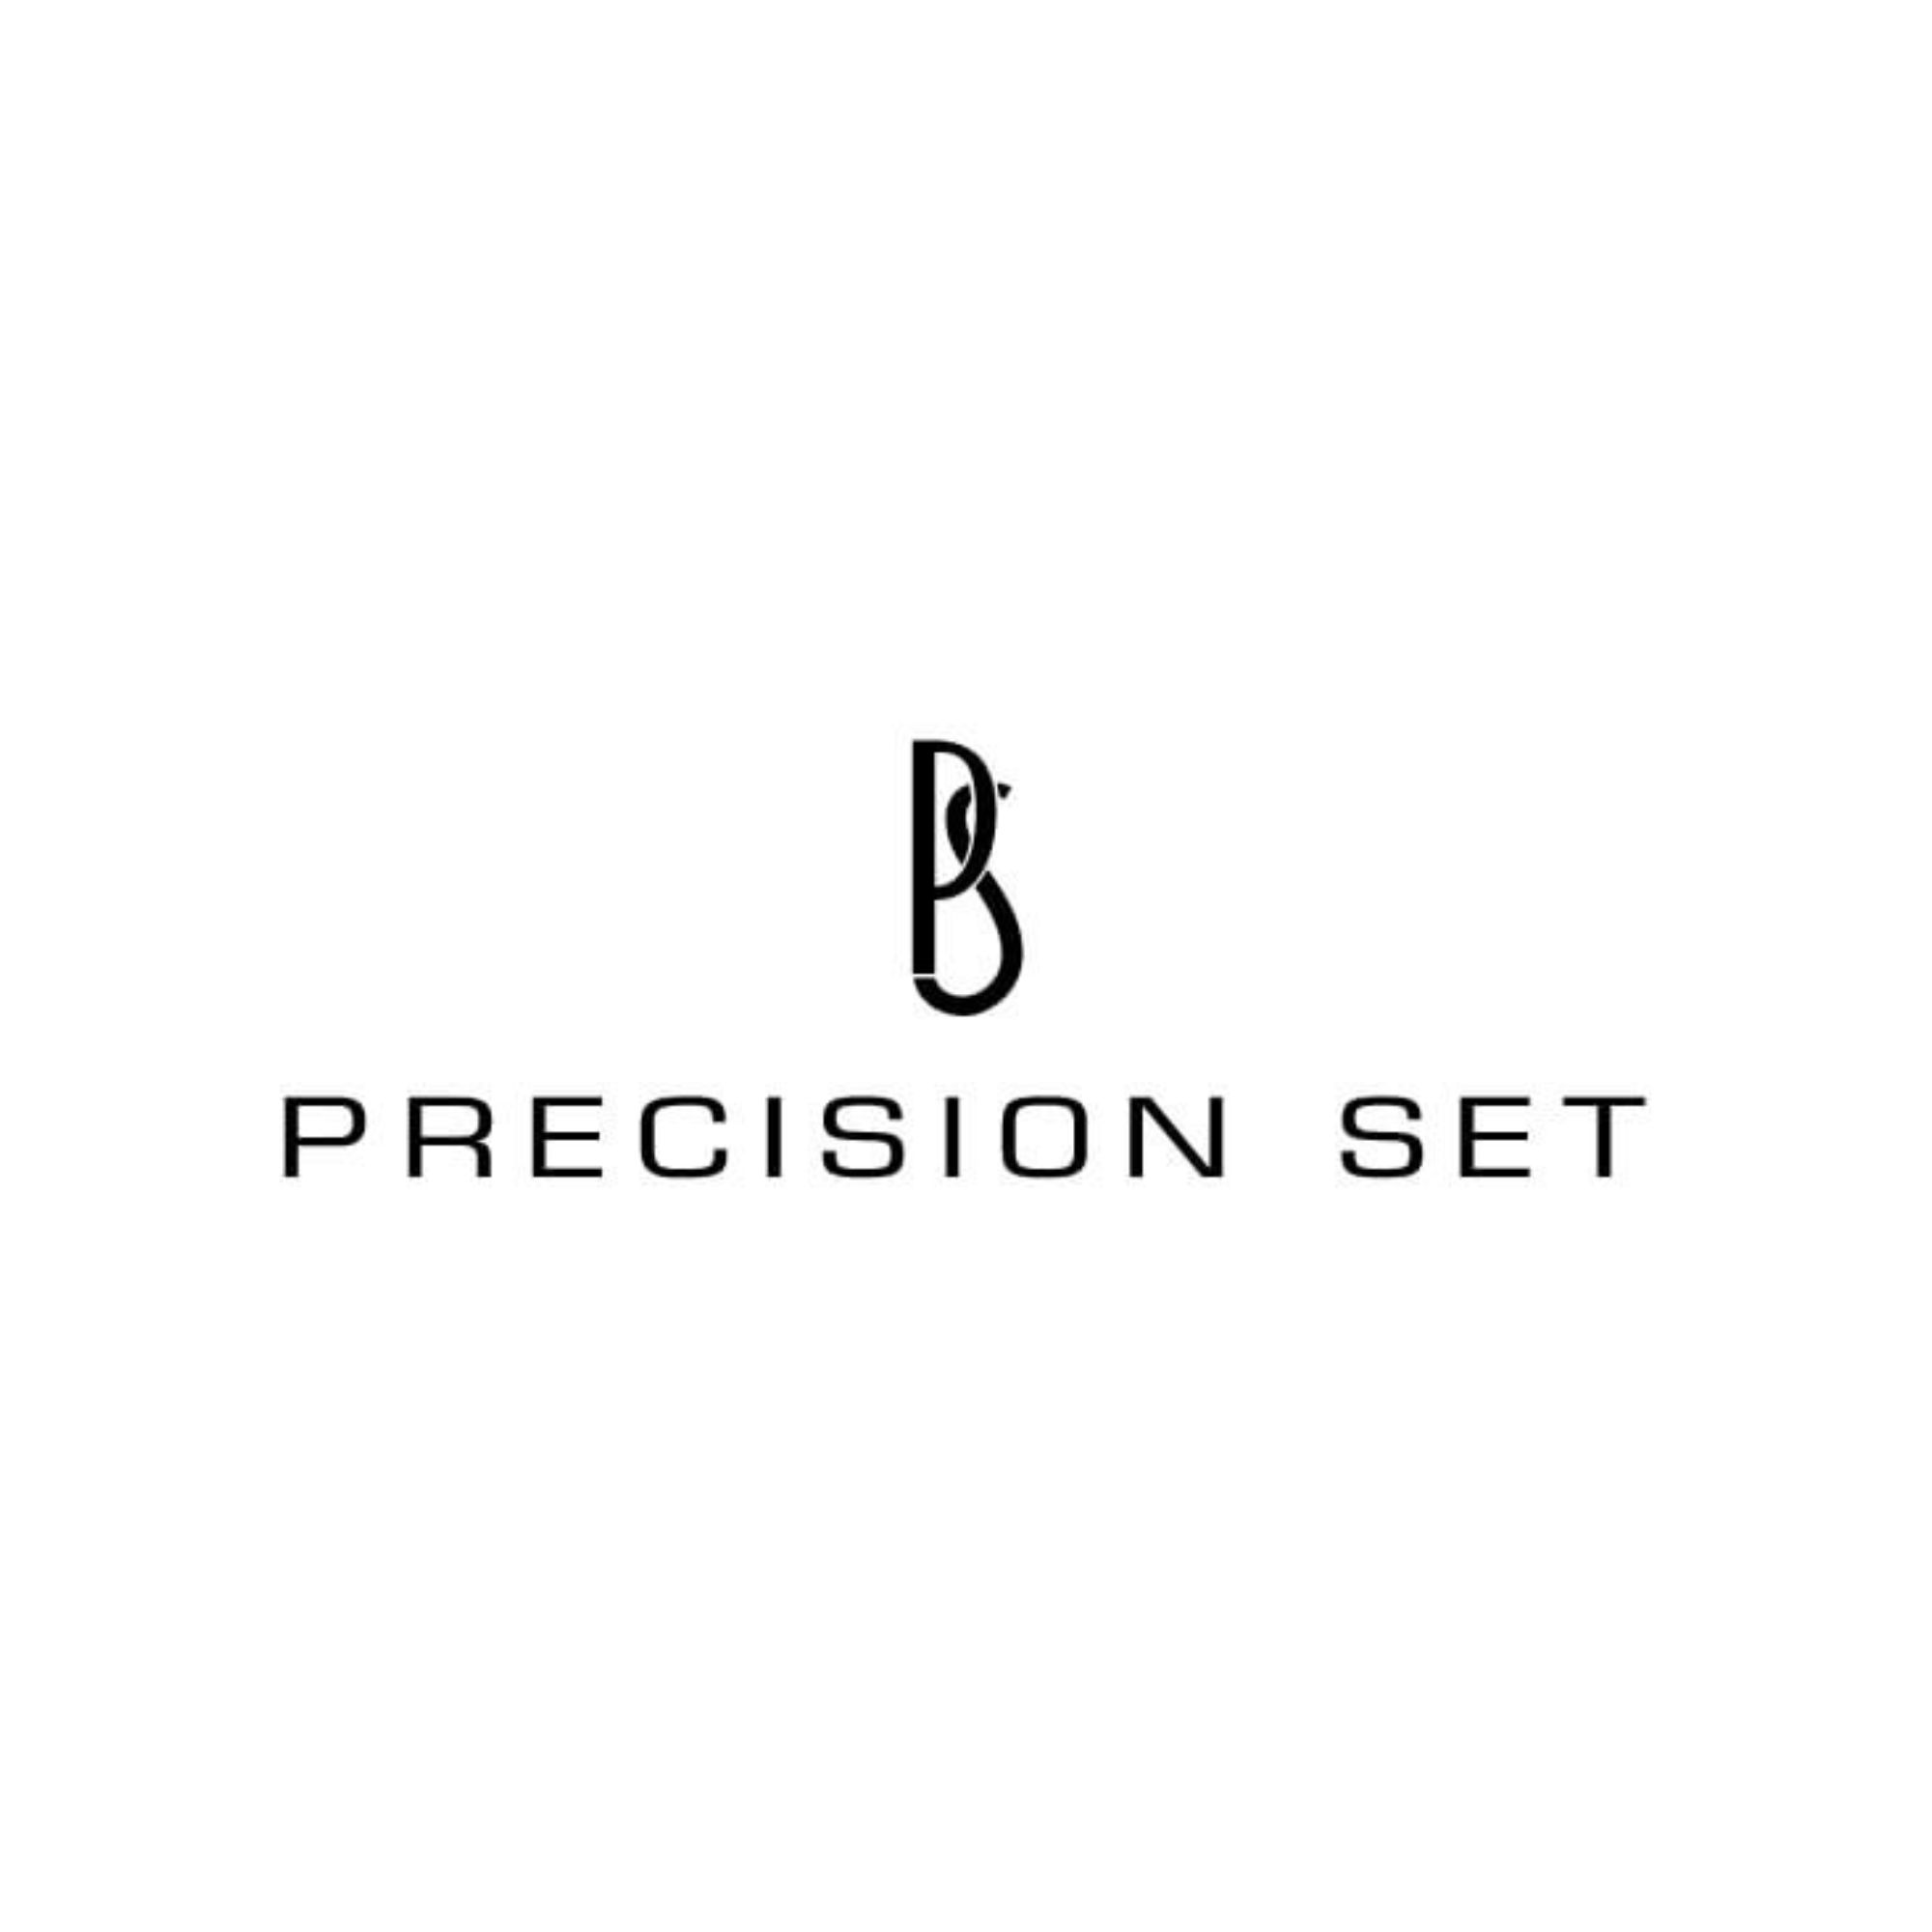 Precision Set collection at Henne Jewelers